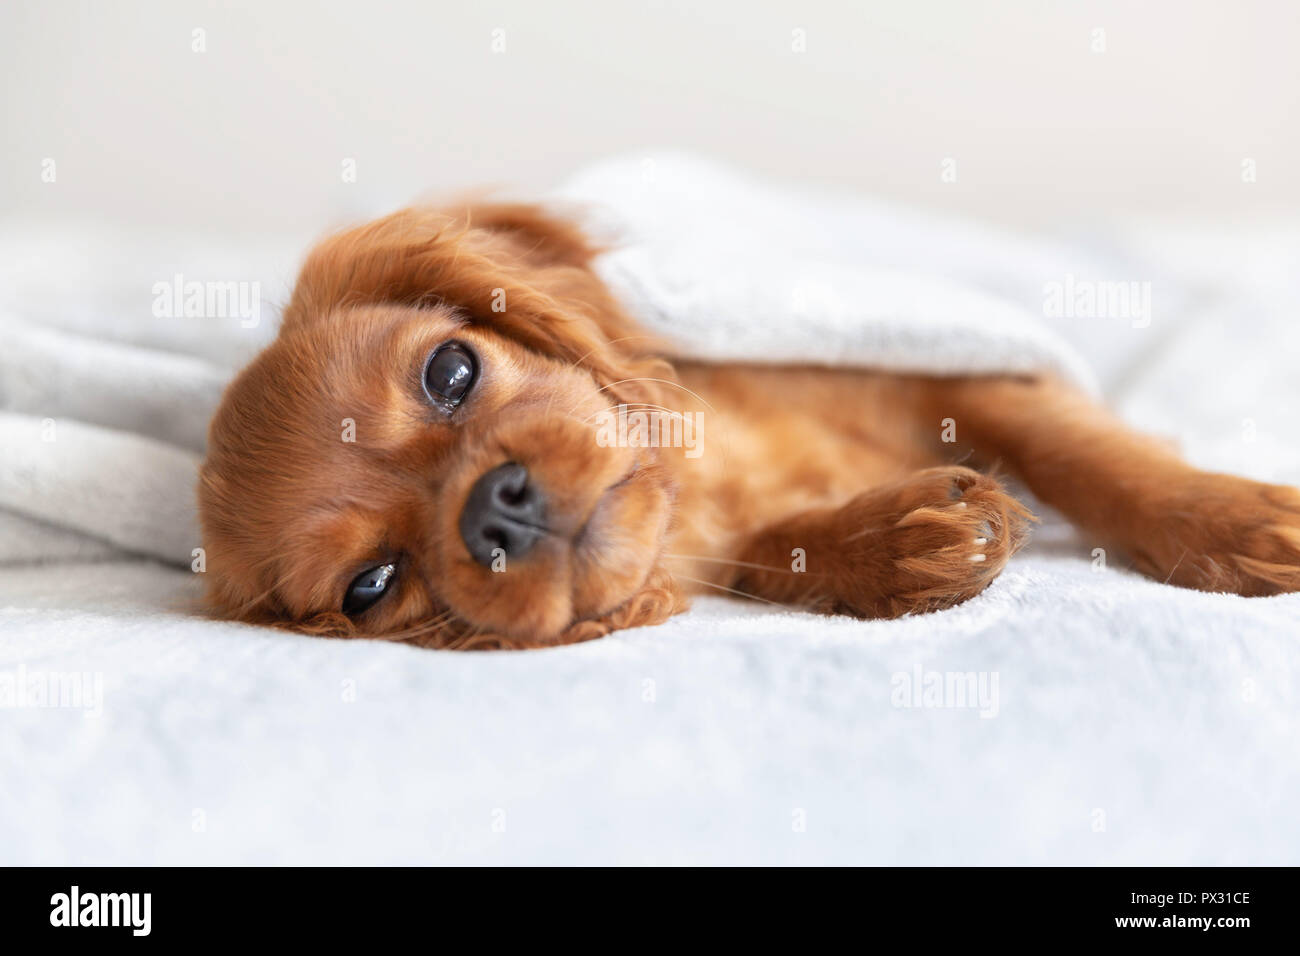 Cute puppy relaxing under the soft blanket Stock Photo